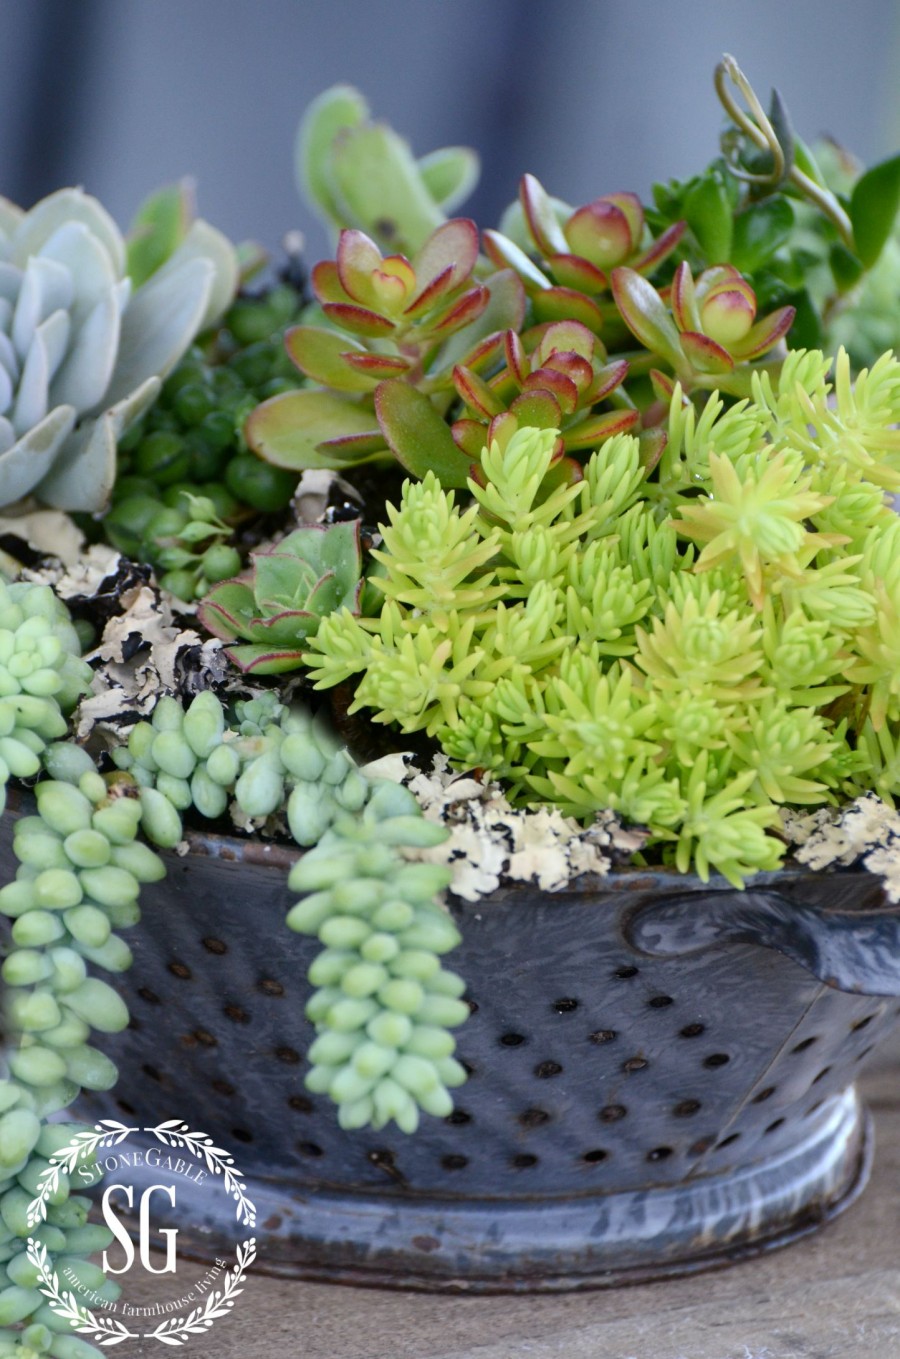 HOW TO PLANT SUCCULENTS-succulents planted in collander-outdoors-stonegableblog.com